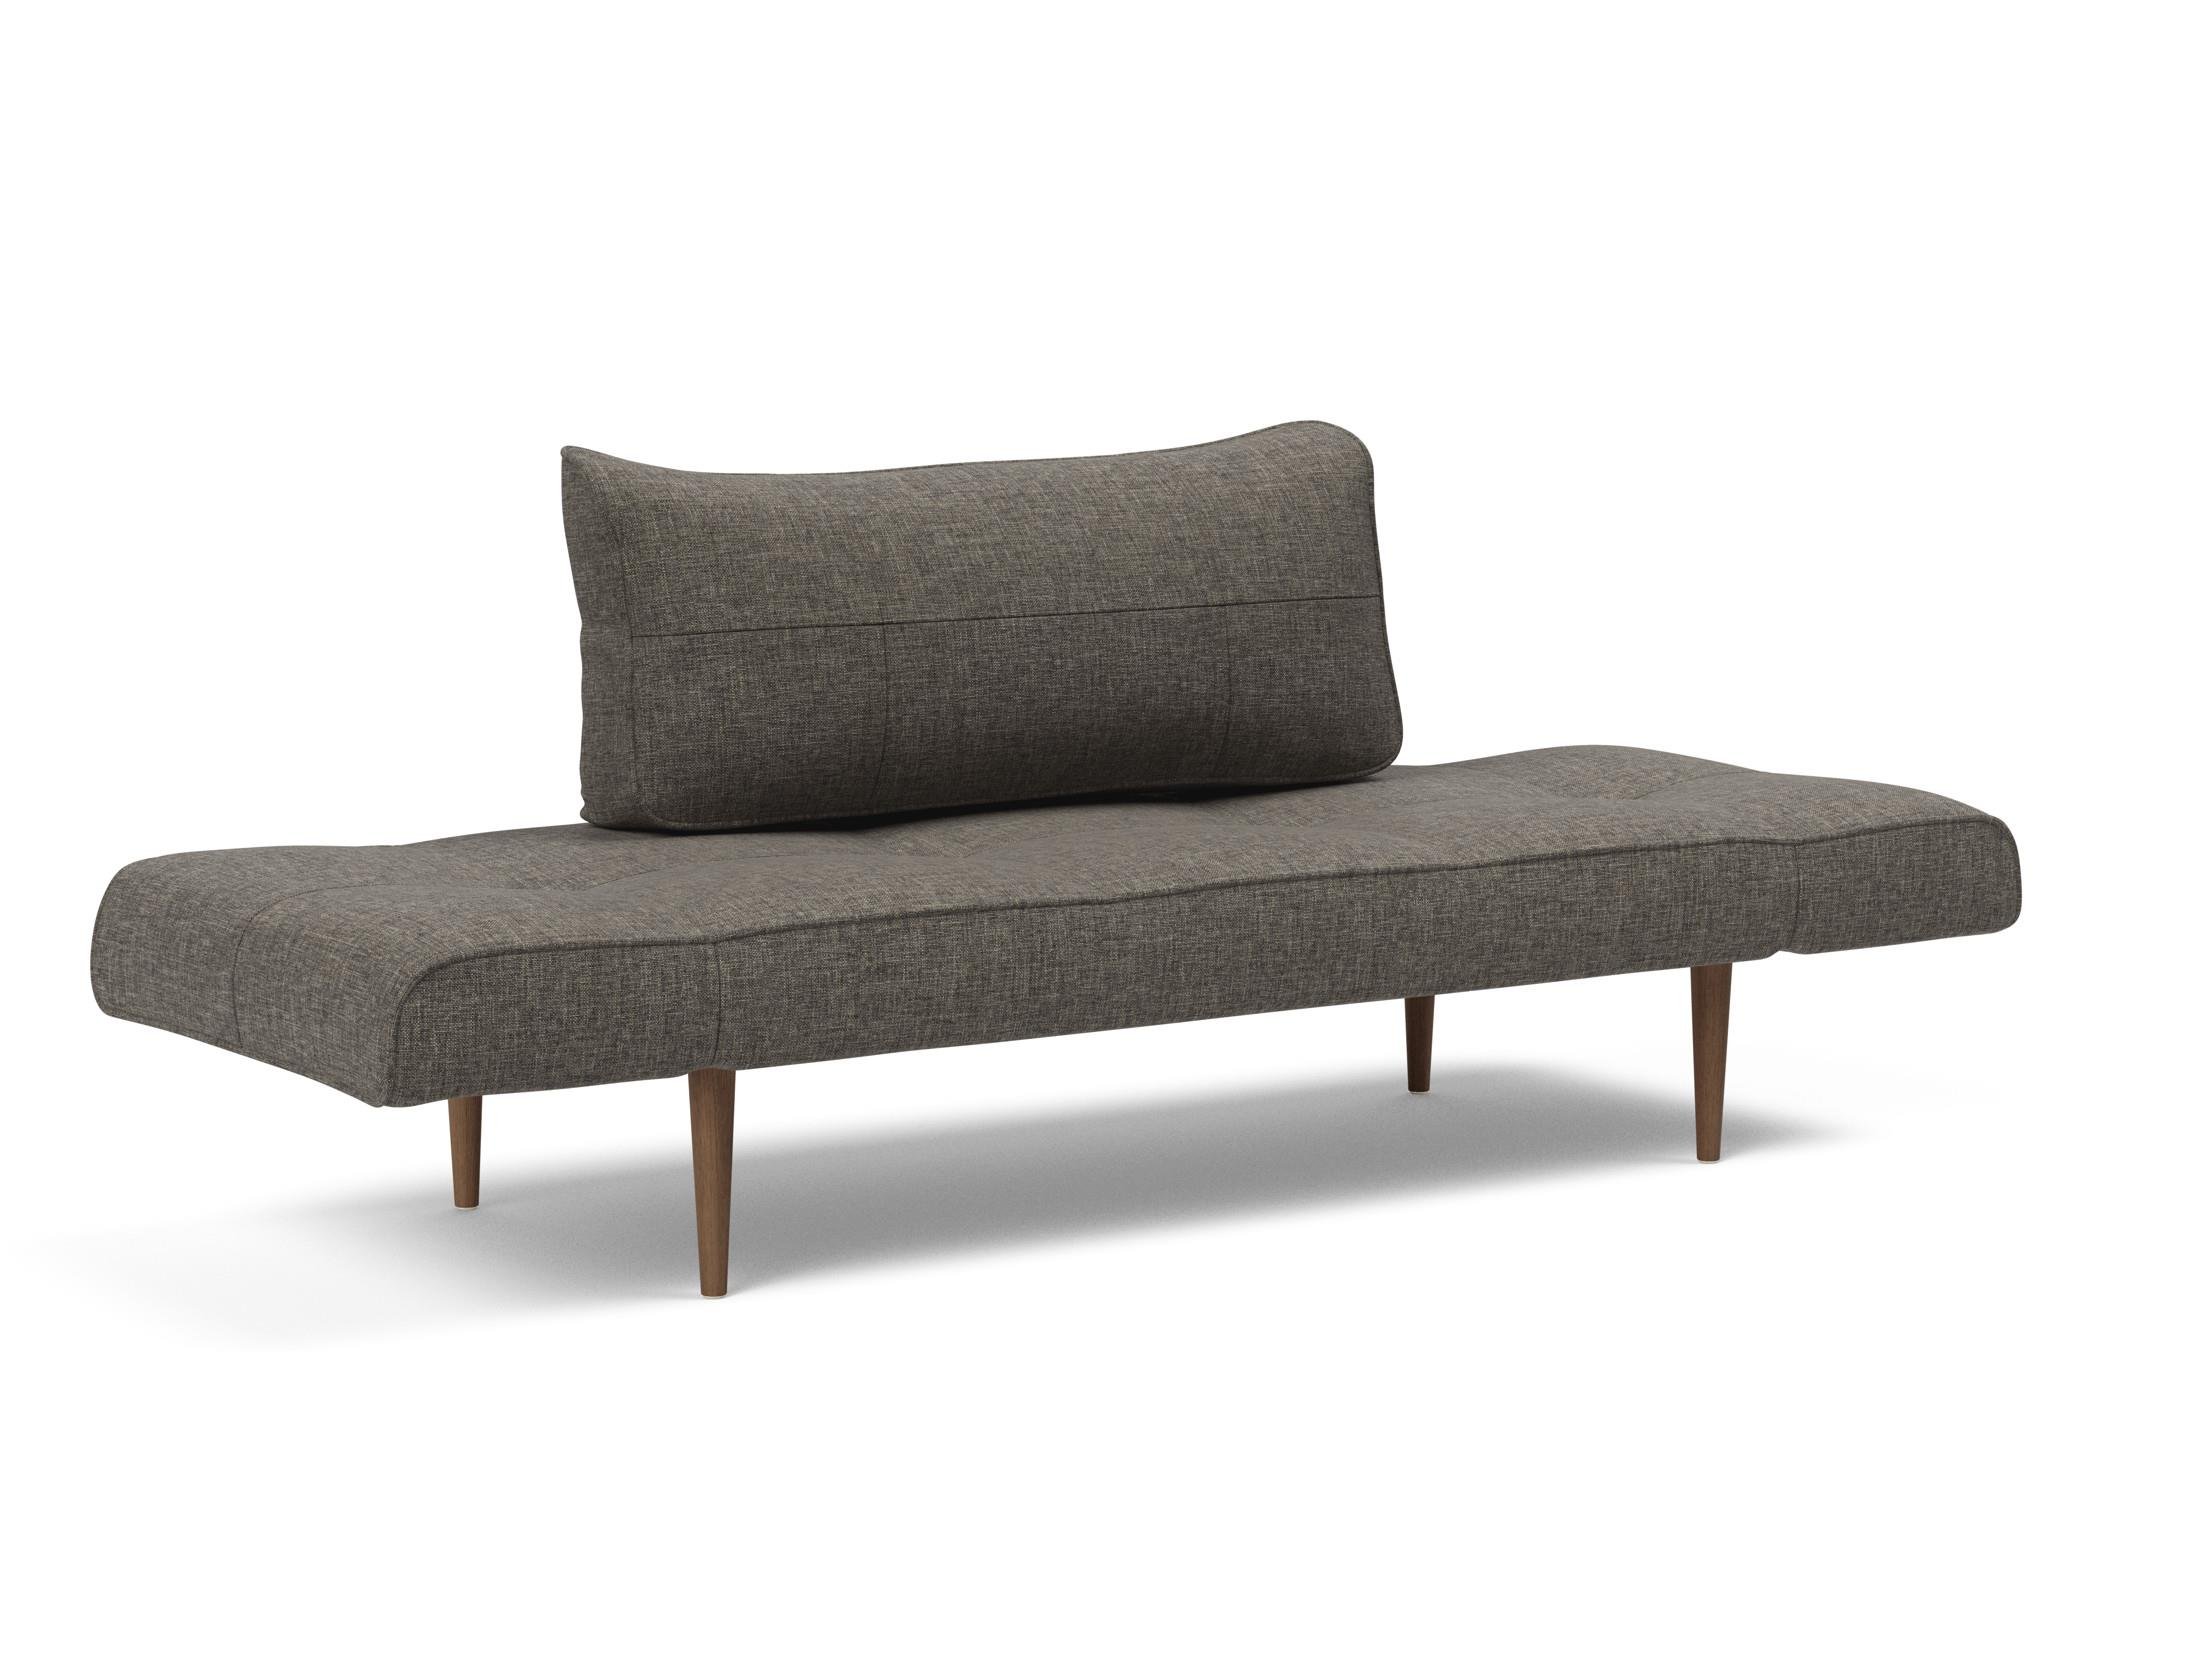 Zeal-Styletto-Daybed-216-p7-web.jpg